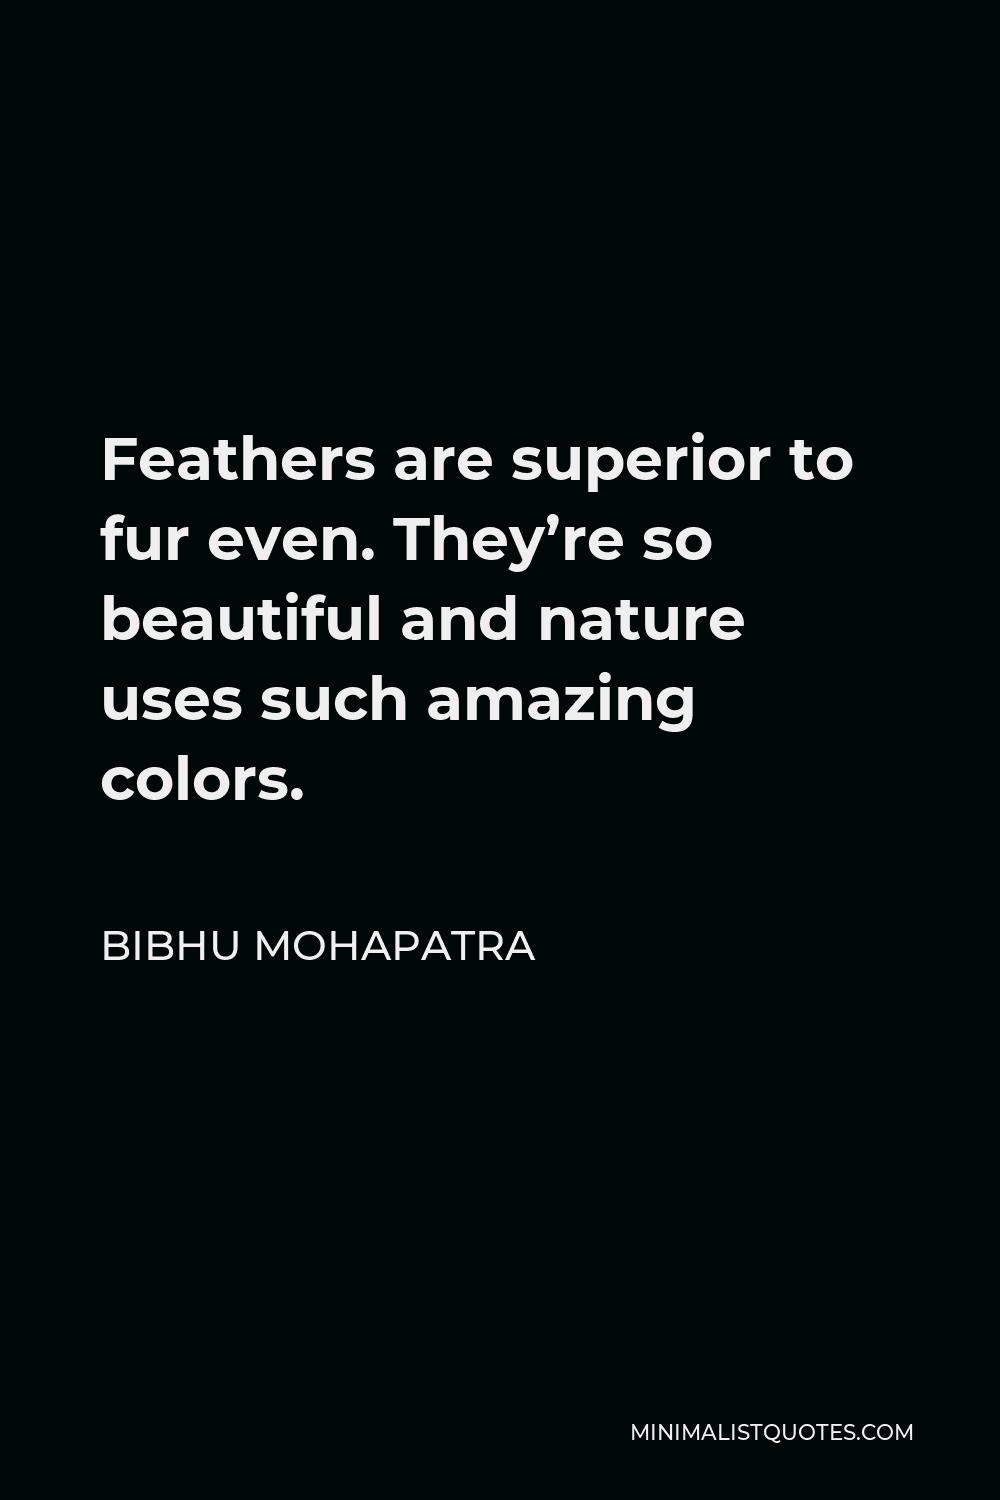 Bibhu Mohapatra Quote - Feathers are superior to fur even. They’re so beautiful and nature uses such amazing colors.